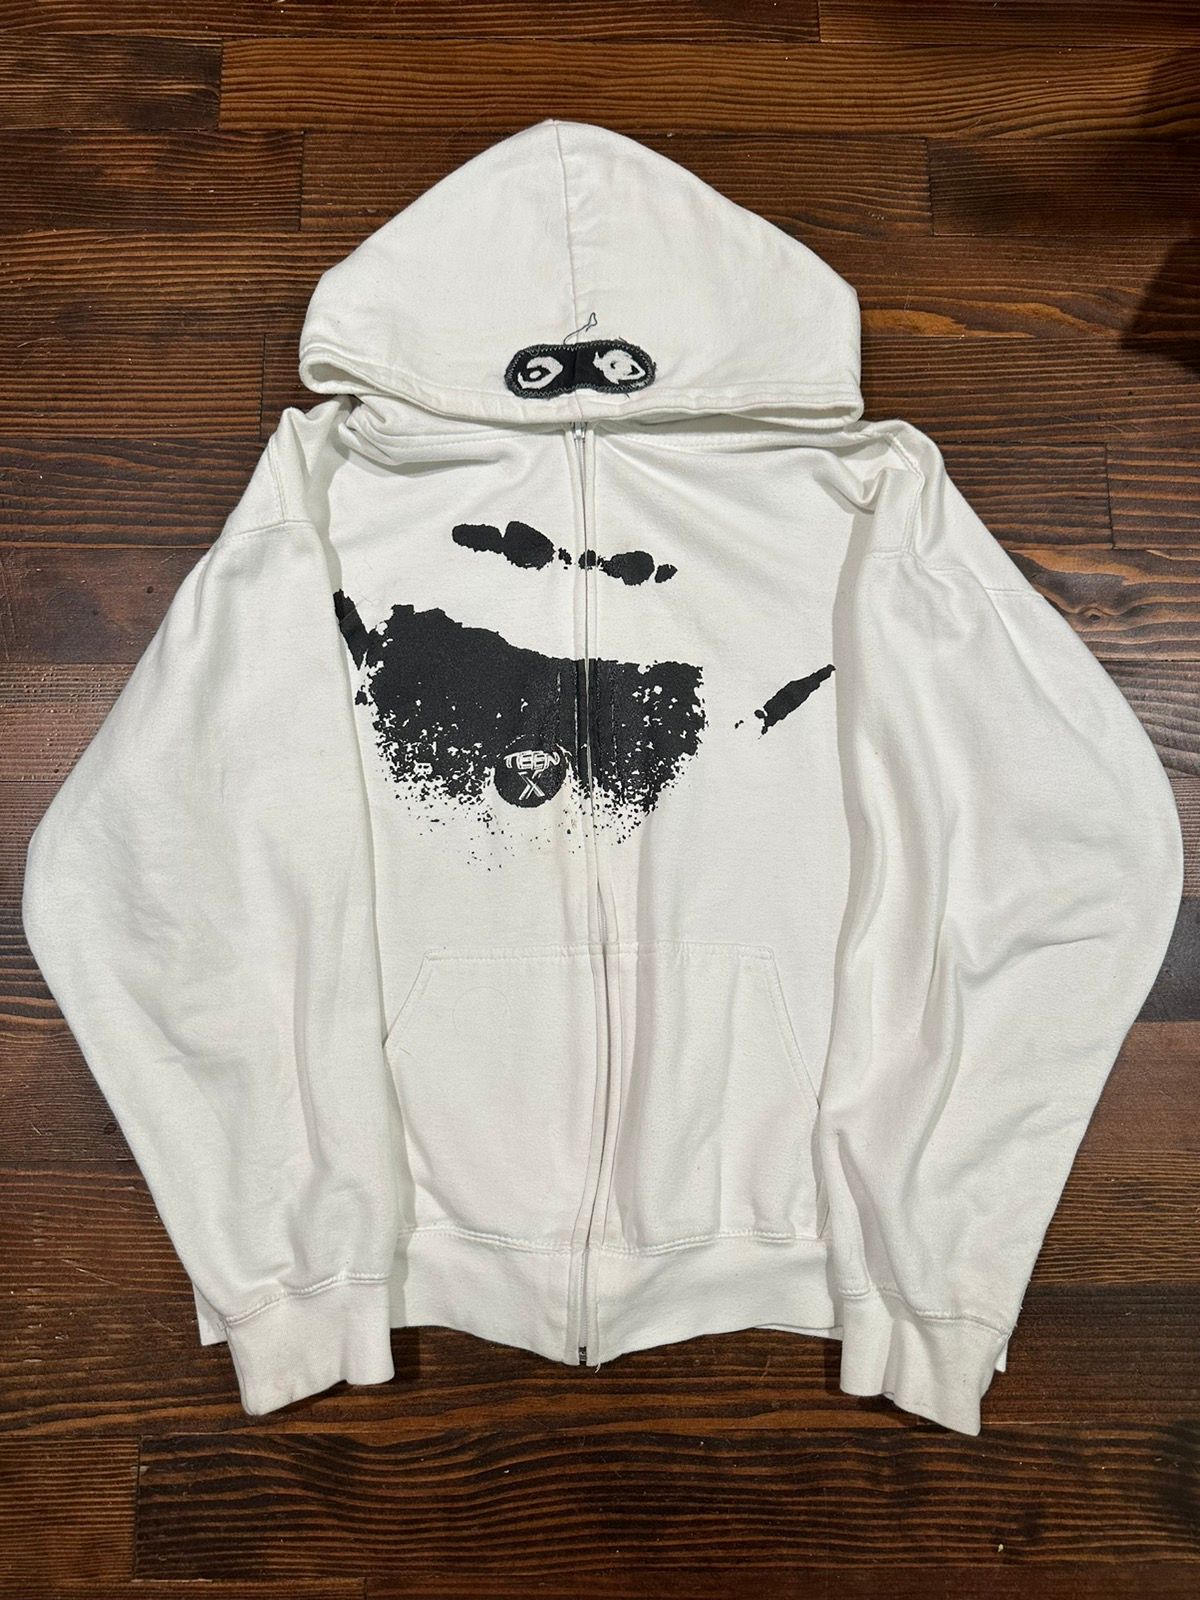 Pre-owned Actual Hate X Ken Carson Teen X White Zip Up Hoodie